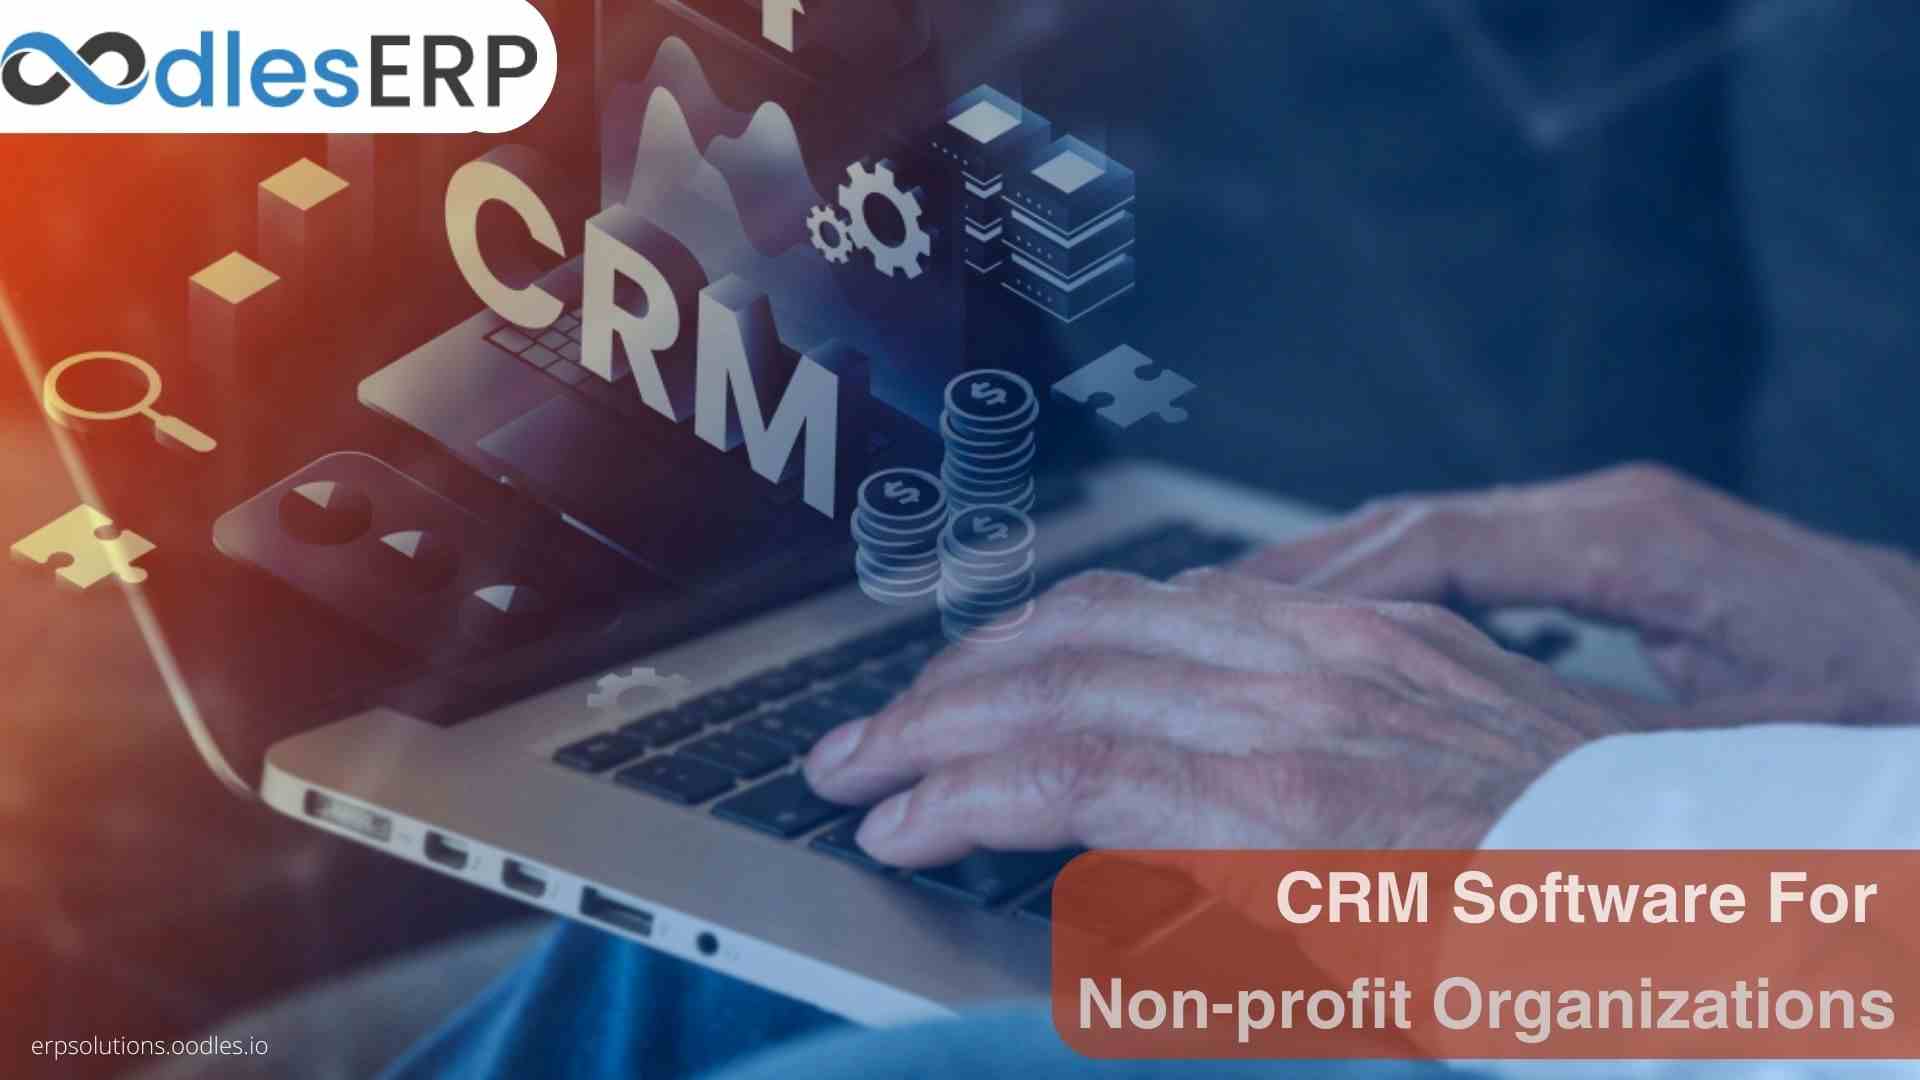 The Benefits of CRM Software Development For Non-profit Organizations